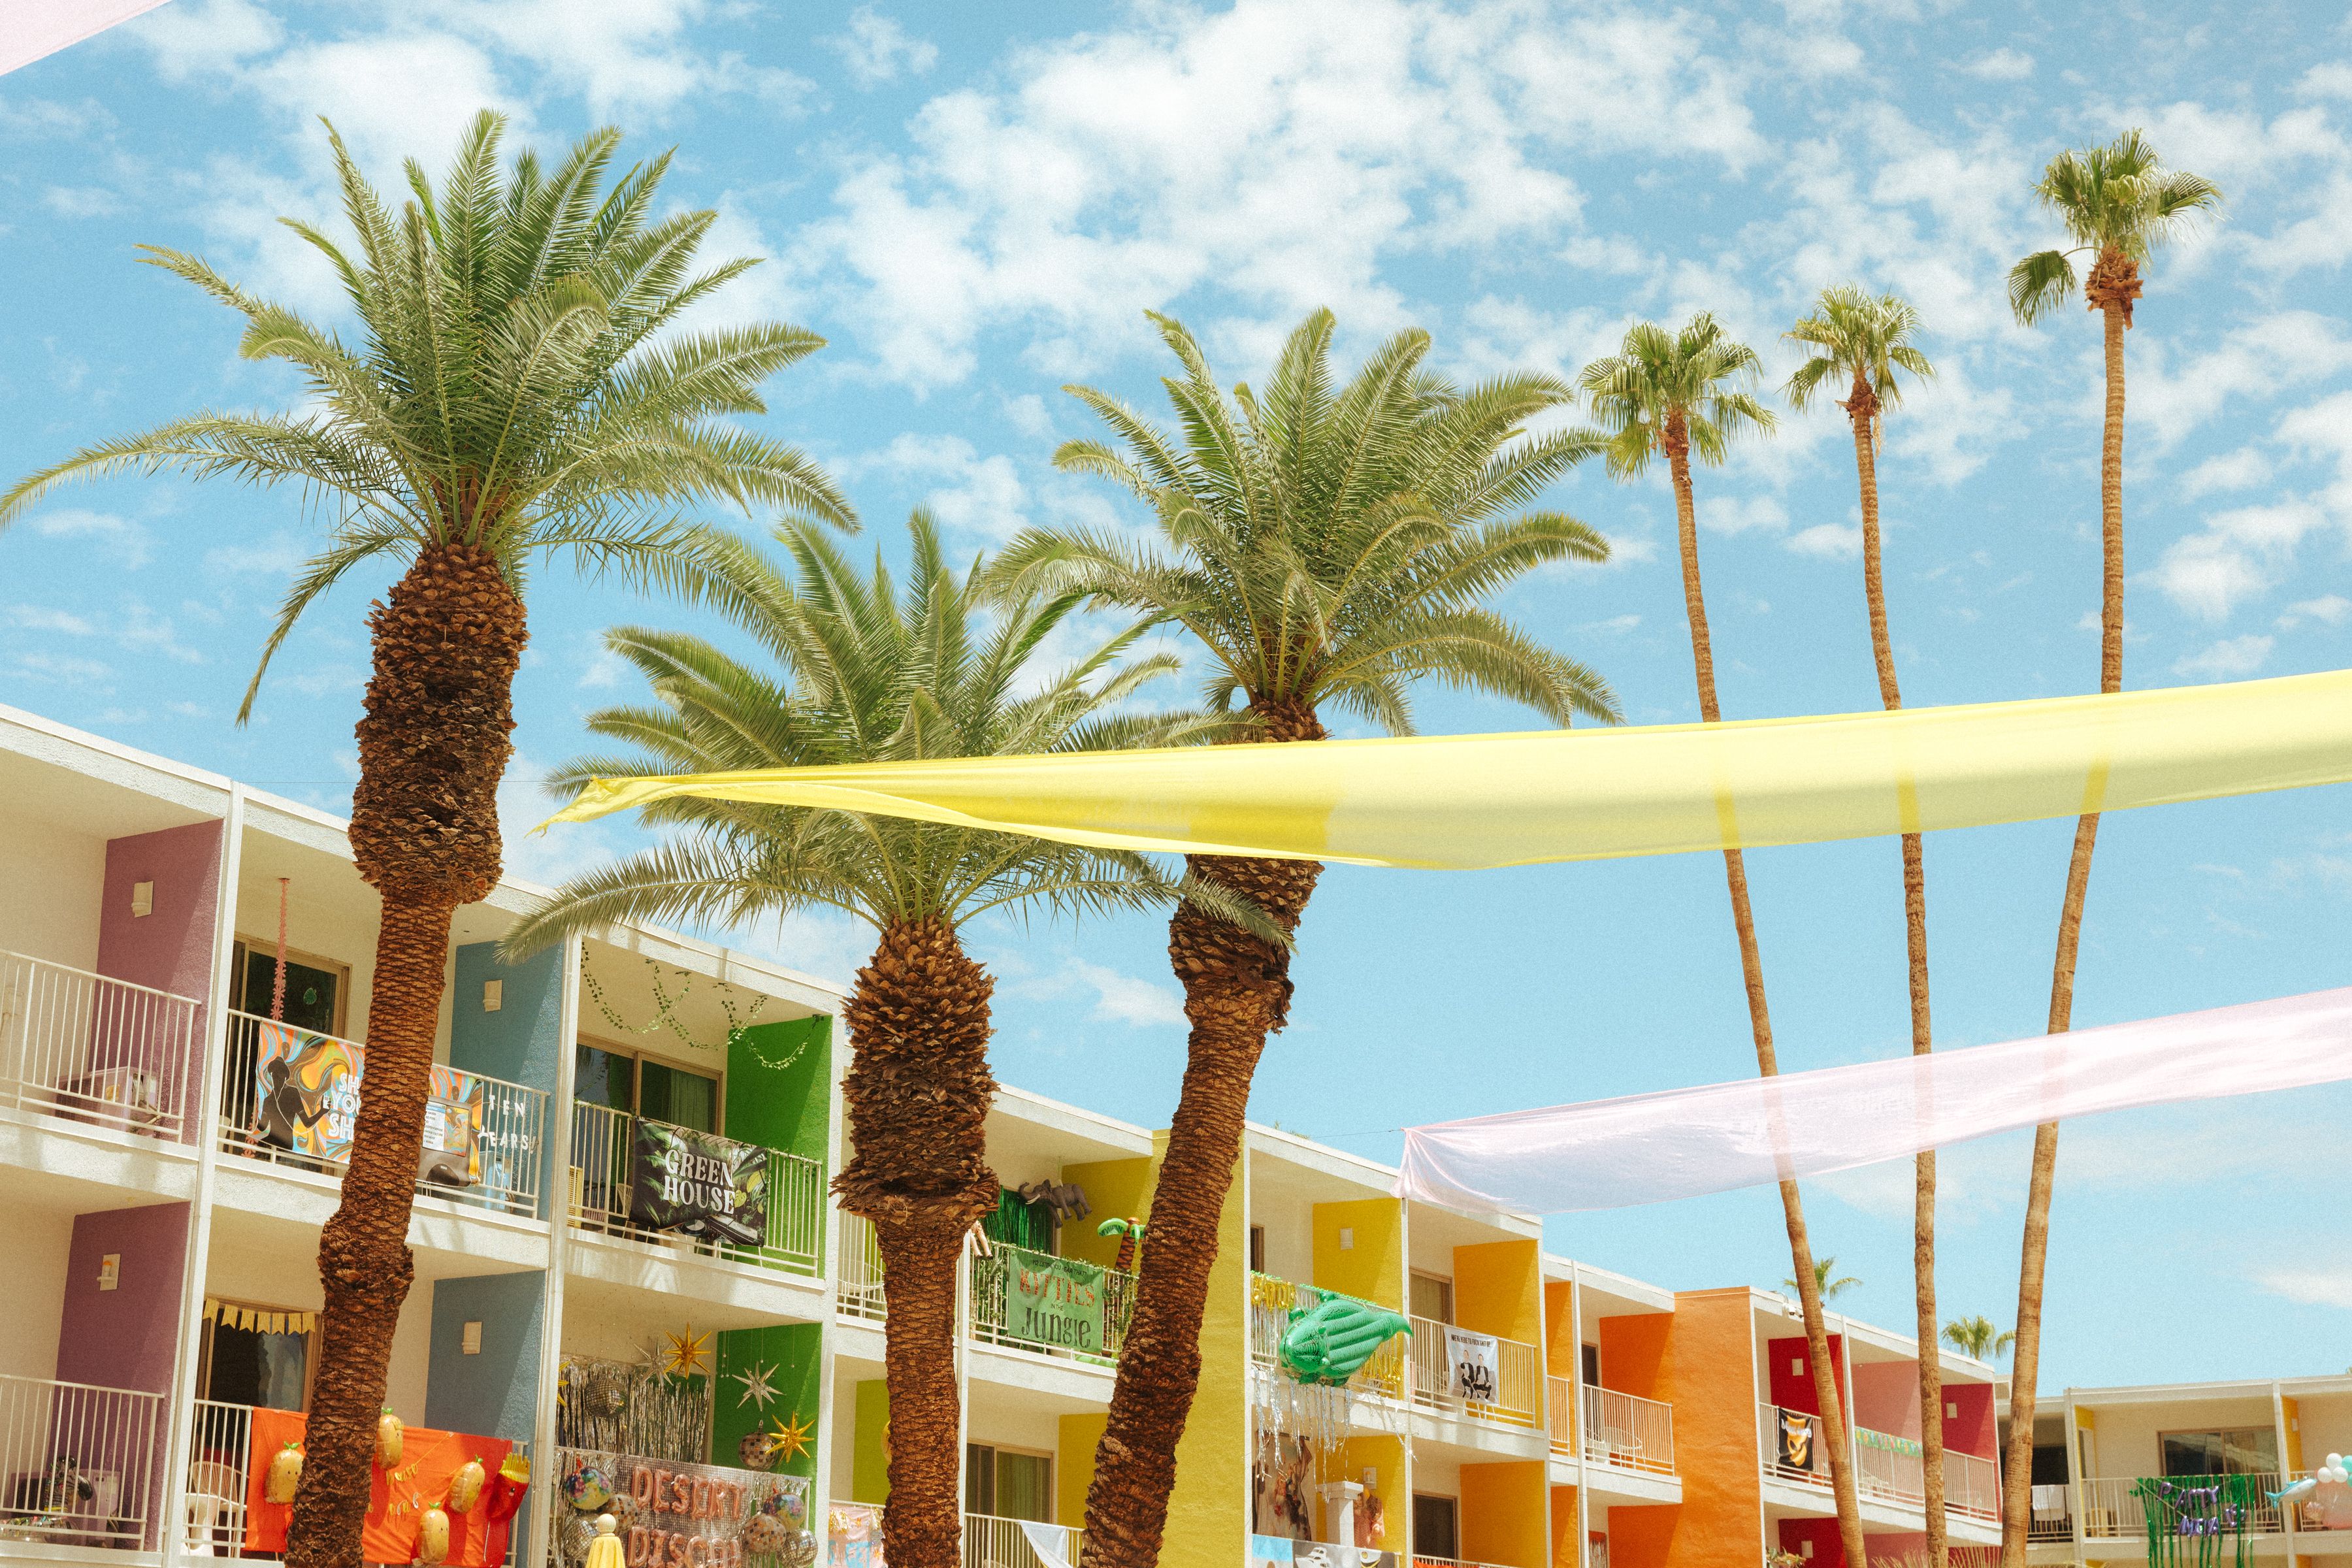 Colorful hotel and palm trees